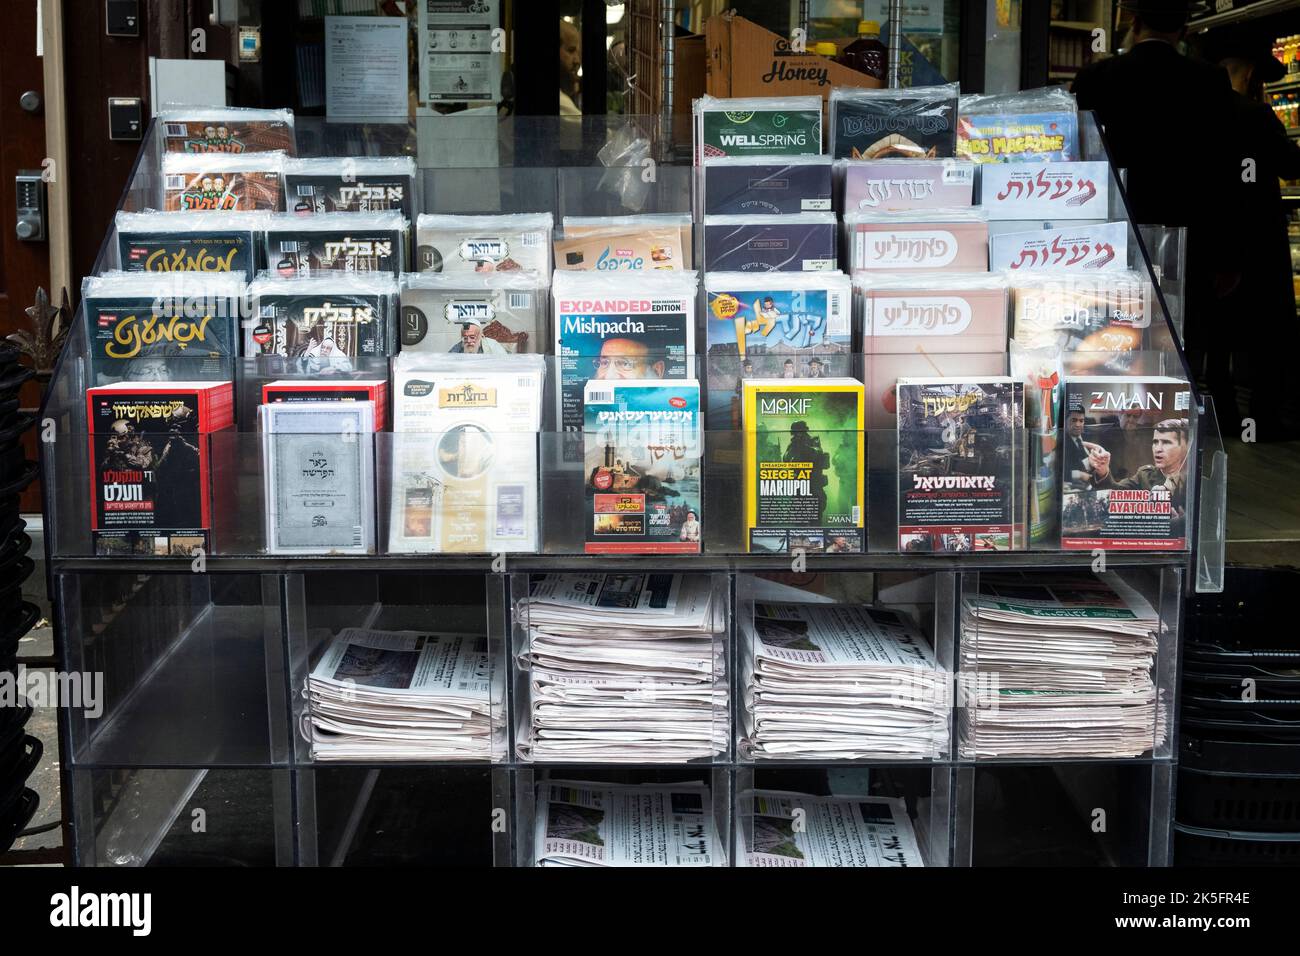 A newsstand with newspapers and magazines primarily in Yiddish. On Lee Avenue in Williamsburg, Brooklyn, New York City. Stock Photo